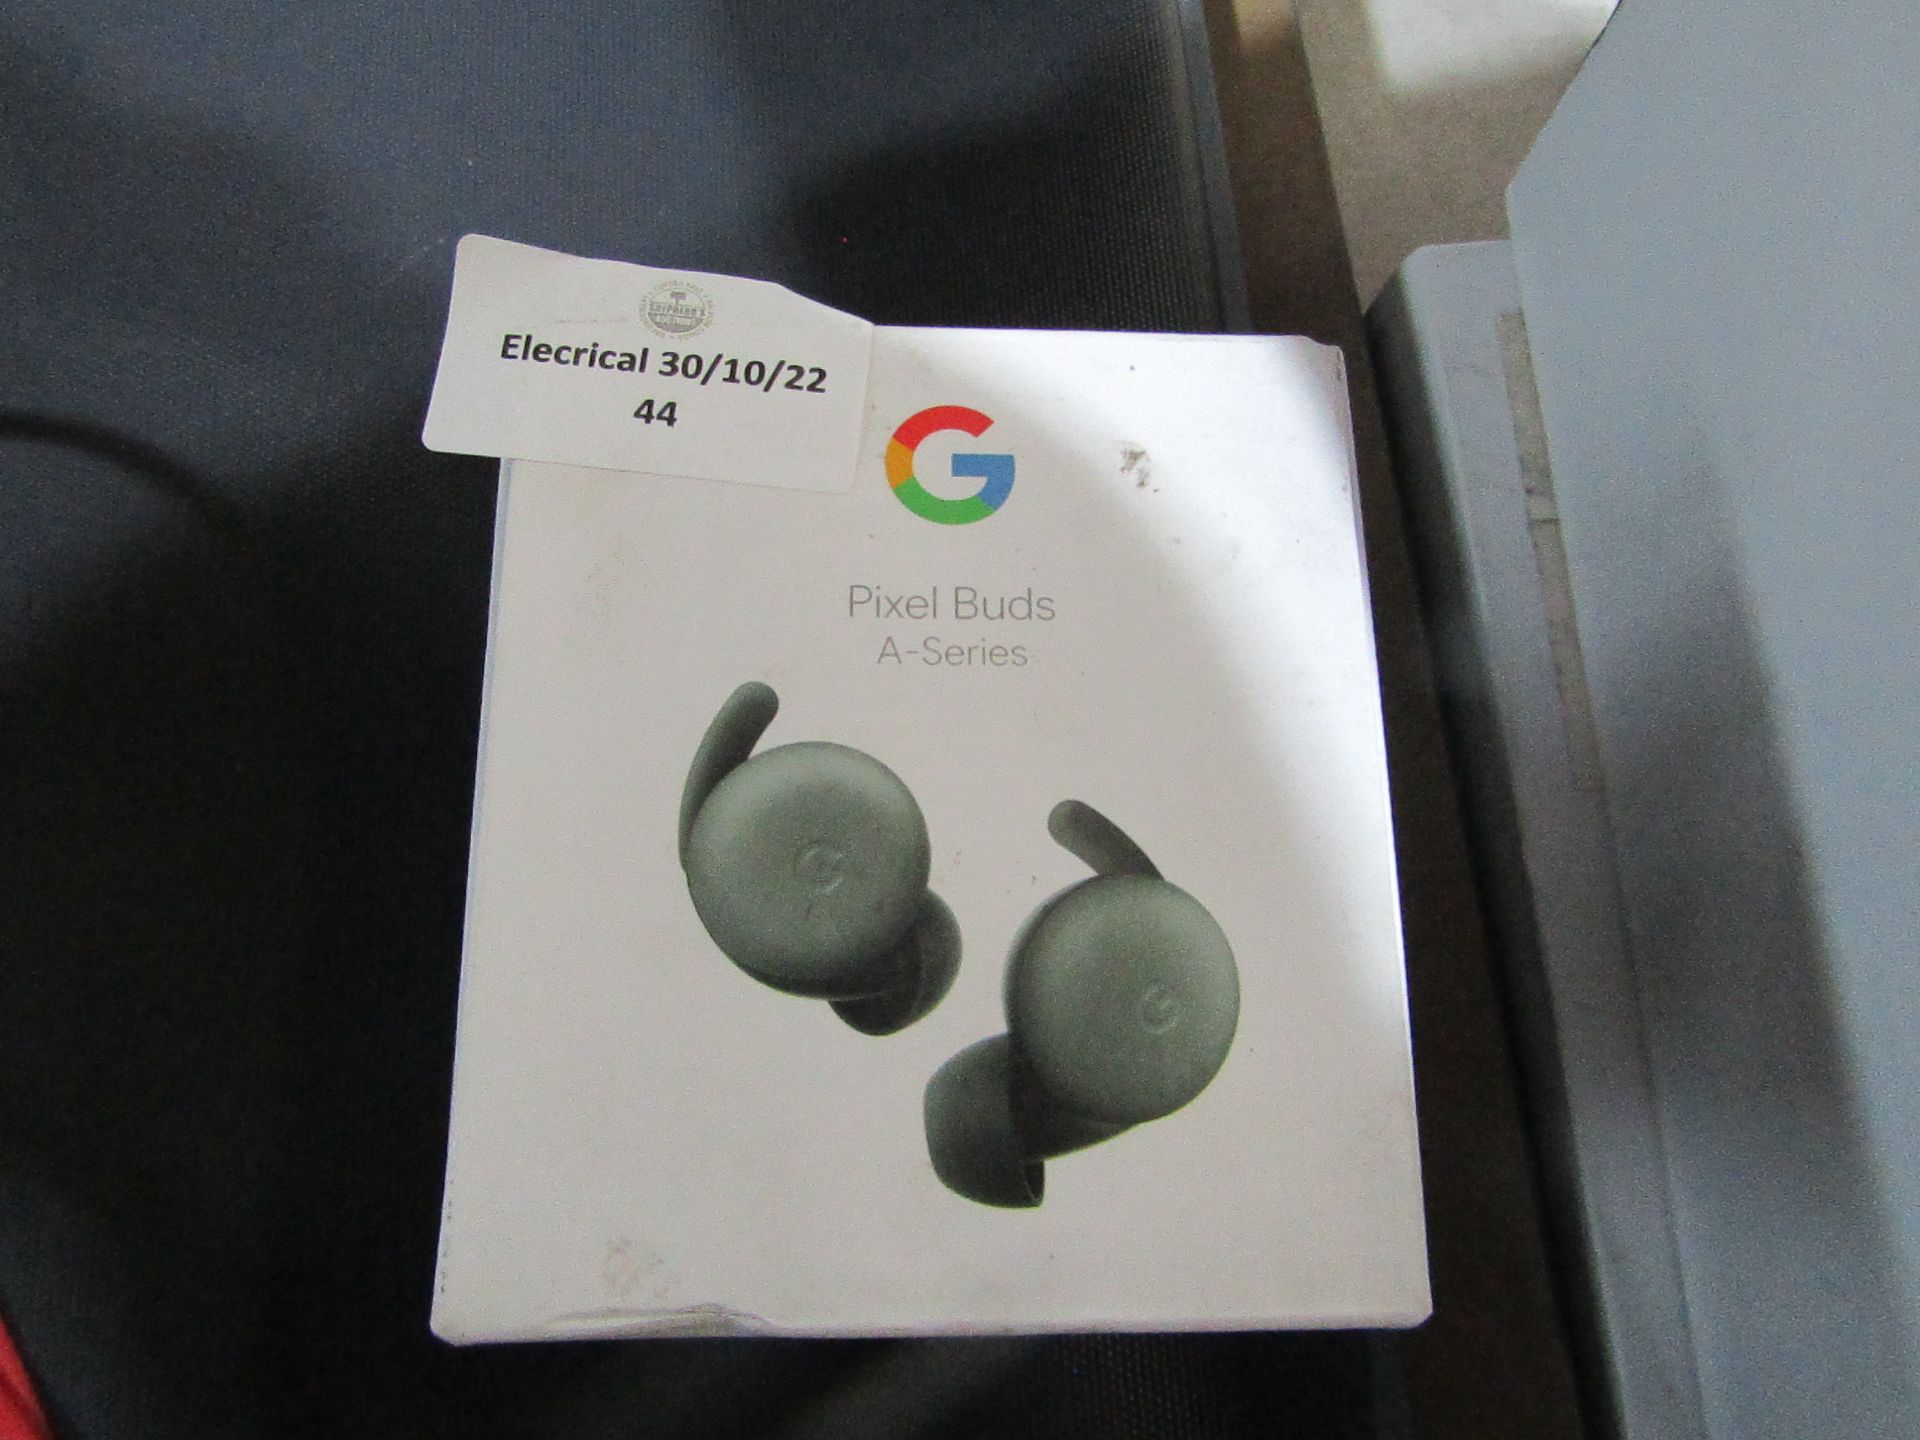 Google Pixel Buds, series A boxed unchecked